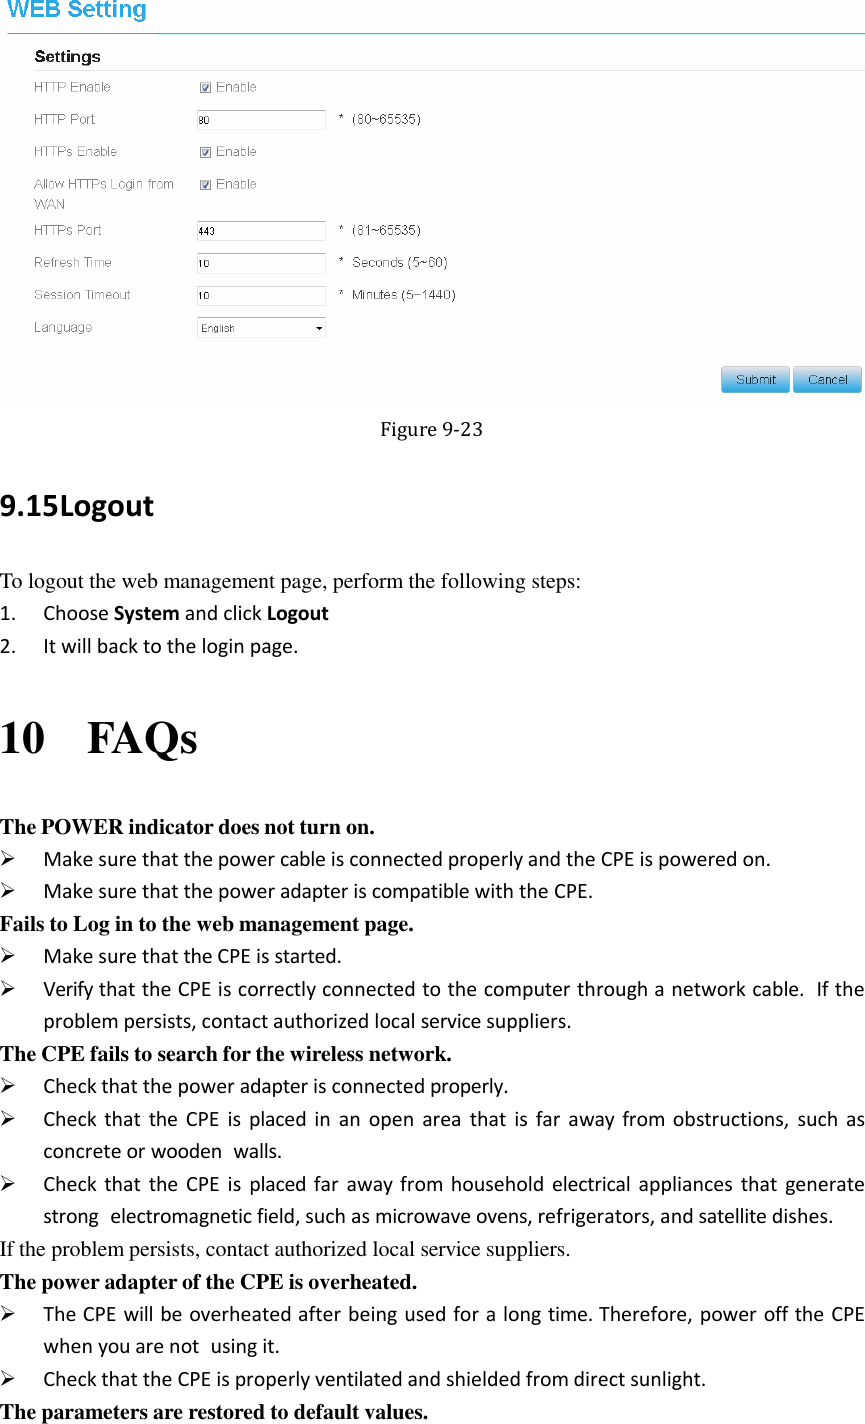    Figure 9-23 9.15 Logout To logout the web management page, perform the following steps: 1. Choose System and click Logout 2. It will back to the login page. 10 FAQs The POWER indicator does not turn on.  Make sure that the power cable is connected properly and the CPE is powered on.  Make sure that the power adapter is compatible with the CPE. Fails to Log in to the web management page.  Make sure that the CPE is started.  Verify that the CPE is correctly connected to the computer through a network cable.  If the problem persists, contact authorized local service suppliers. The CPE fails to search for the wireless network.  Check that the power adapter is connected properly.  Check  that  the CPE  is placed in  an  open  area that  is  far away from obstructions, such  as concrete or wooden  walls.  Check that  the CPE  is  placed far  away from household  electrical appliances that  generate strong  electromagnetic field, such as microwave ovens, refrigerators, and satellite dishes. If the problem persists, contact authorized local service suppliers. The power adapter of the CPE is overheated.  The CPE will be overheated after being used for a long time. Therefore, power off the CPE when you are not  using it.  Check that the CPE is properly ventilated and shielded from direct sunlight. The parameters are restored to default values. 